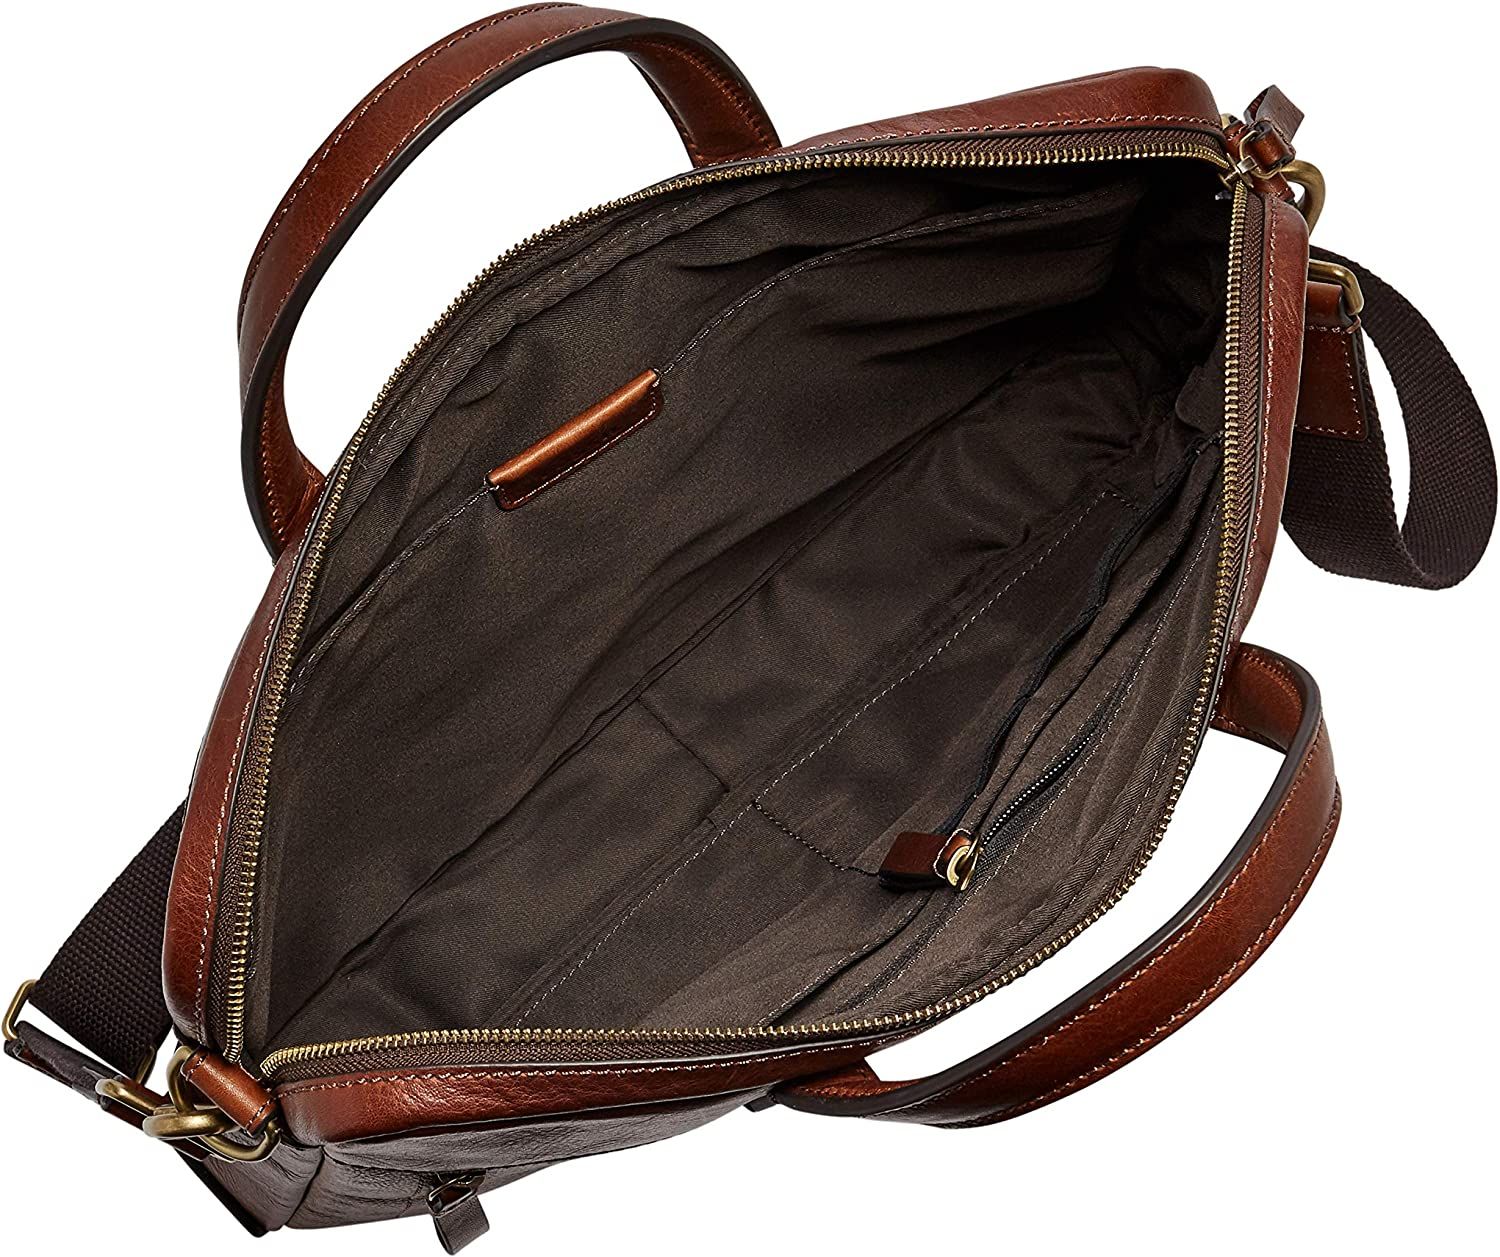 7 Best Laptop Carrying Cases for Traveling